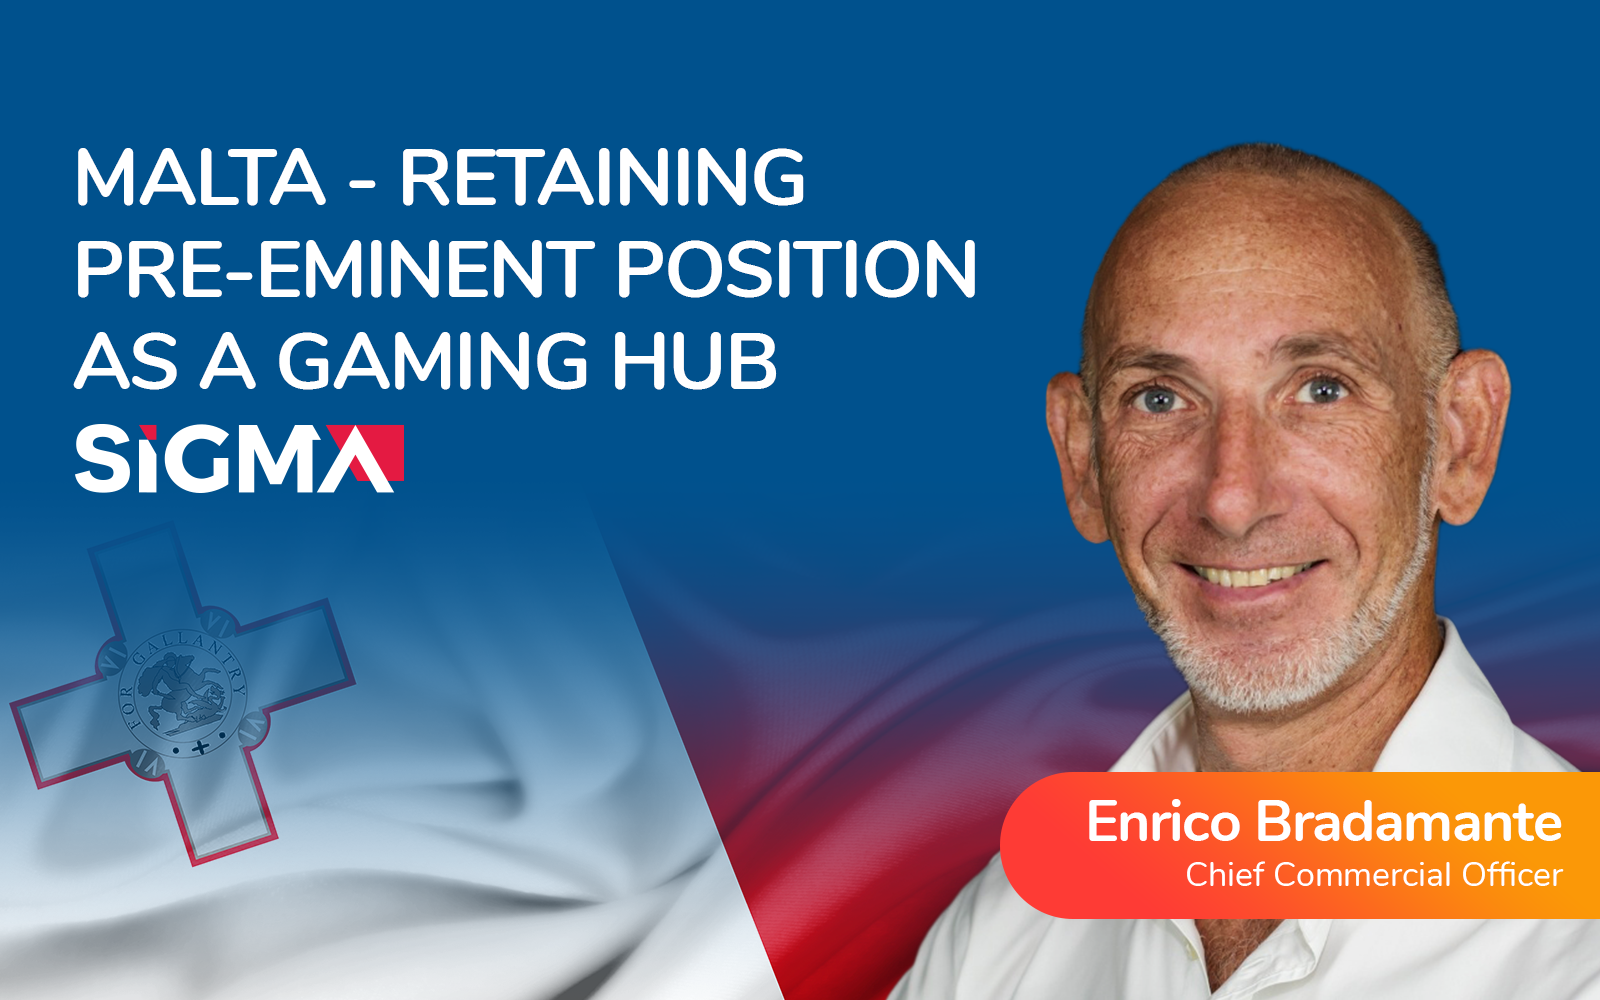 “Malta: Retaining its pre-eminent position as the leading global remote gaming hub